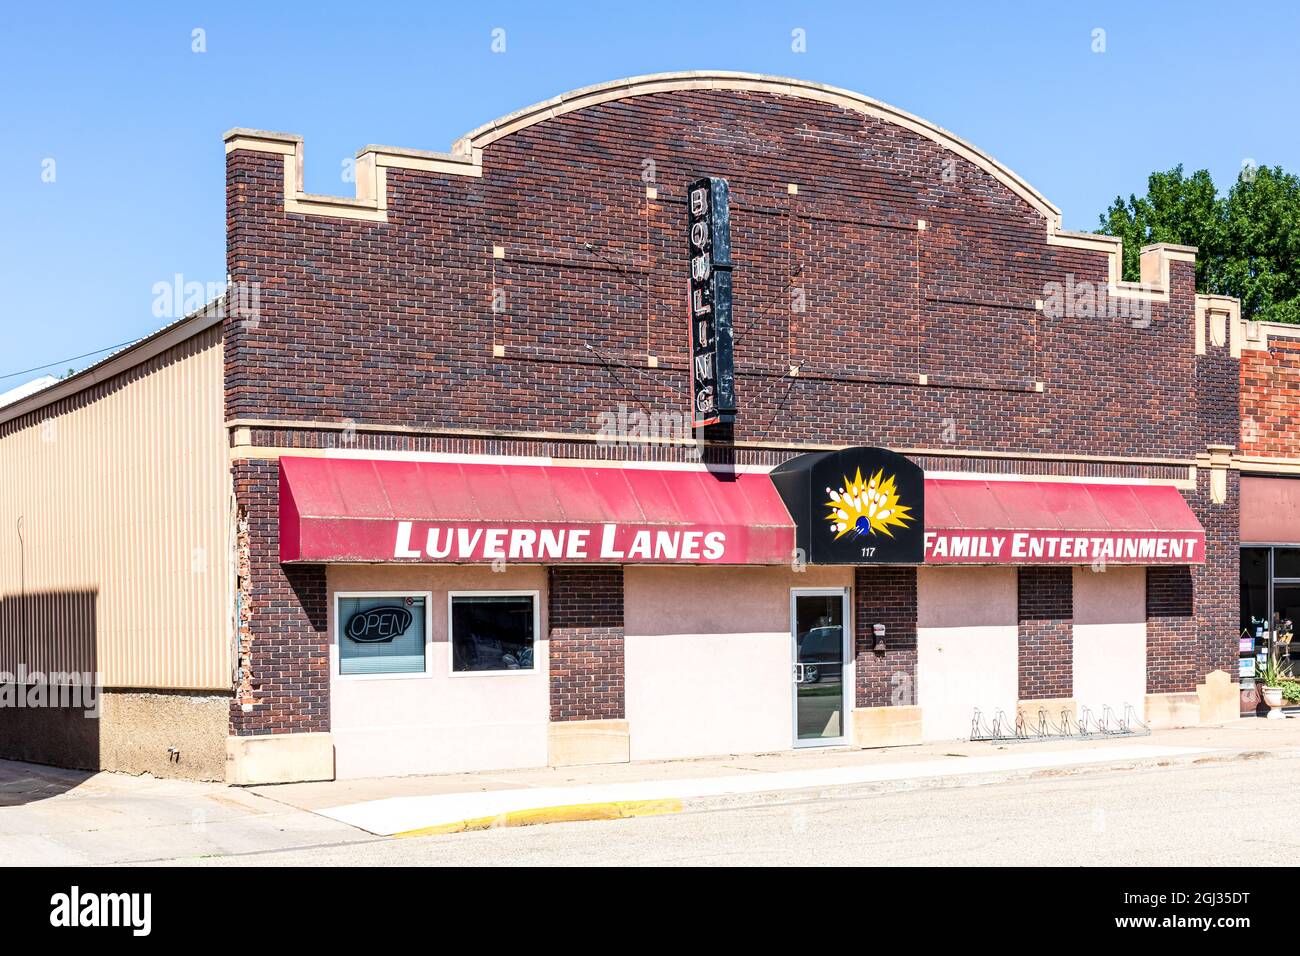 LUVERNE, MN, USA-21 AUGUST 2021: Luverne Lanes Family Entertainment, a bowling alley.  Building and signs with logo. Stock Photo